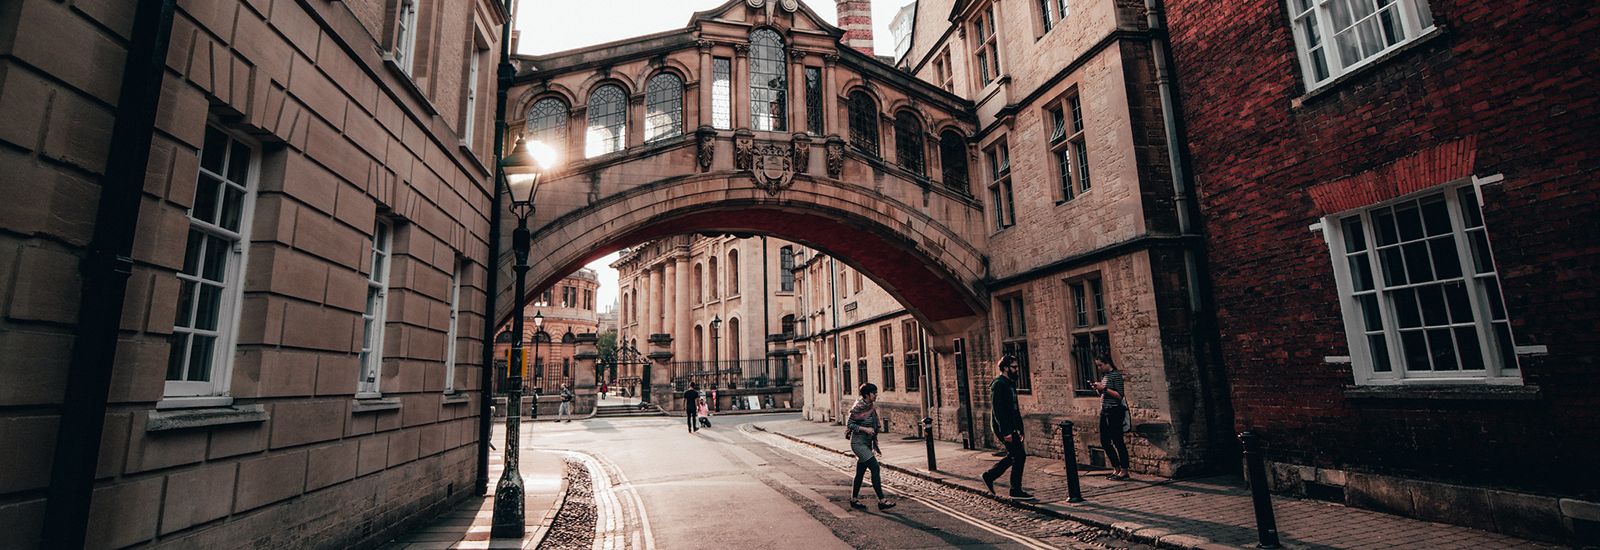 People walking under the Bridge of Sighs at sunset